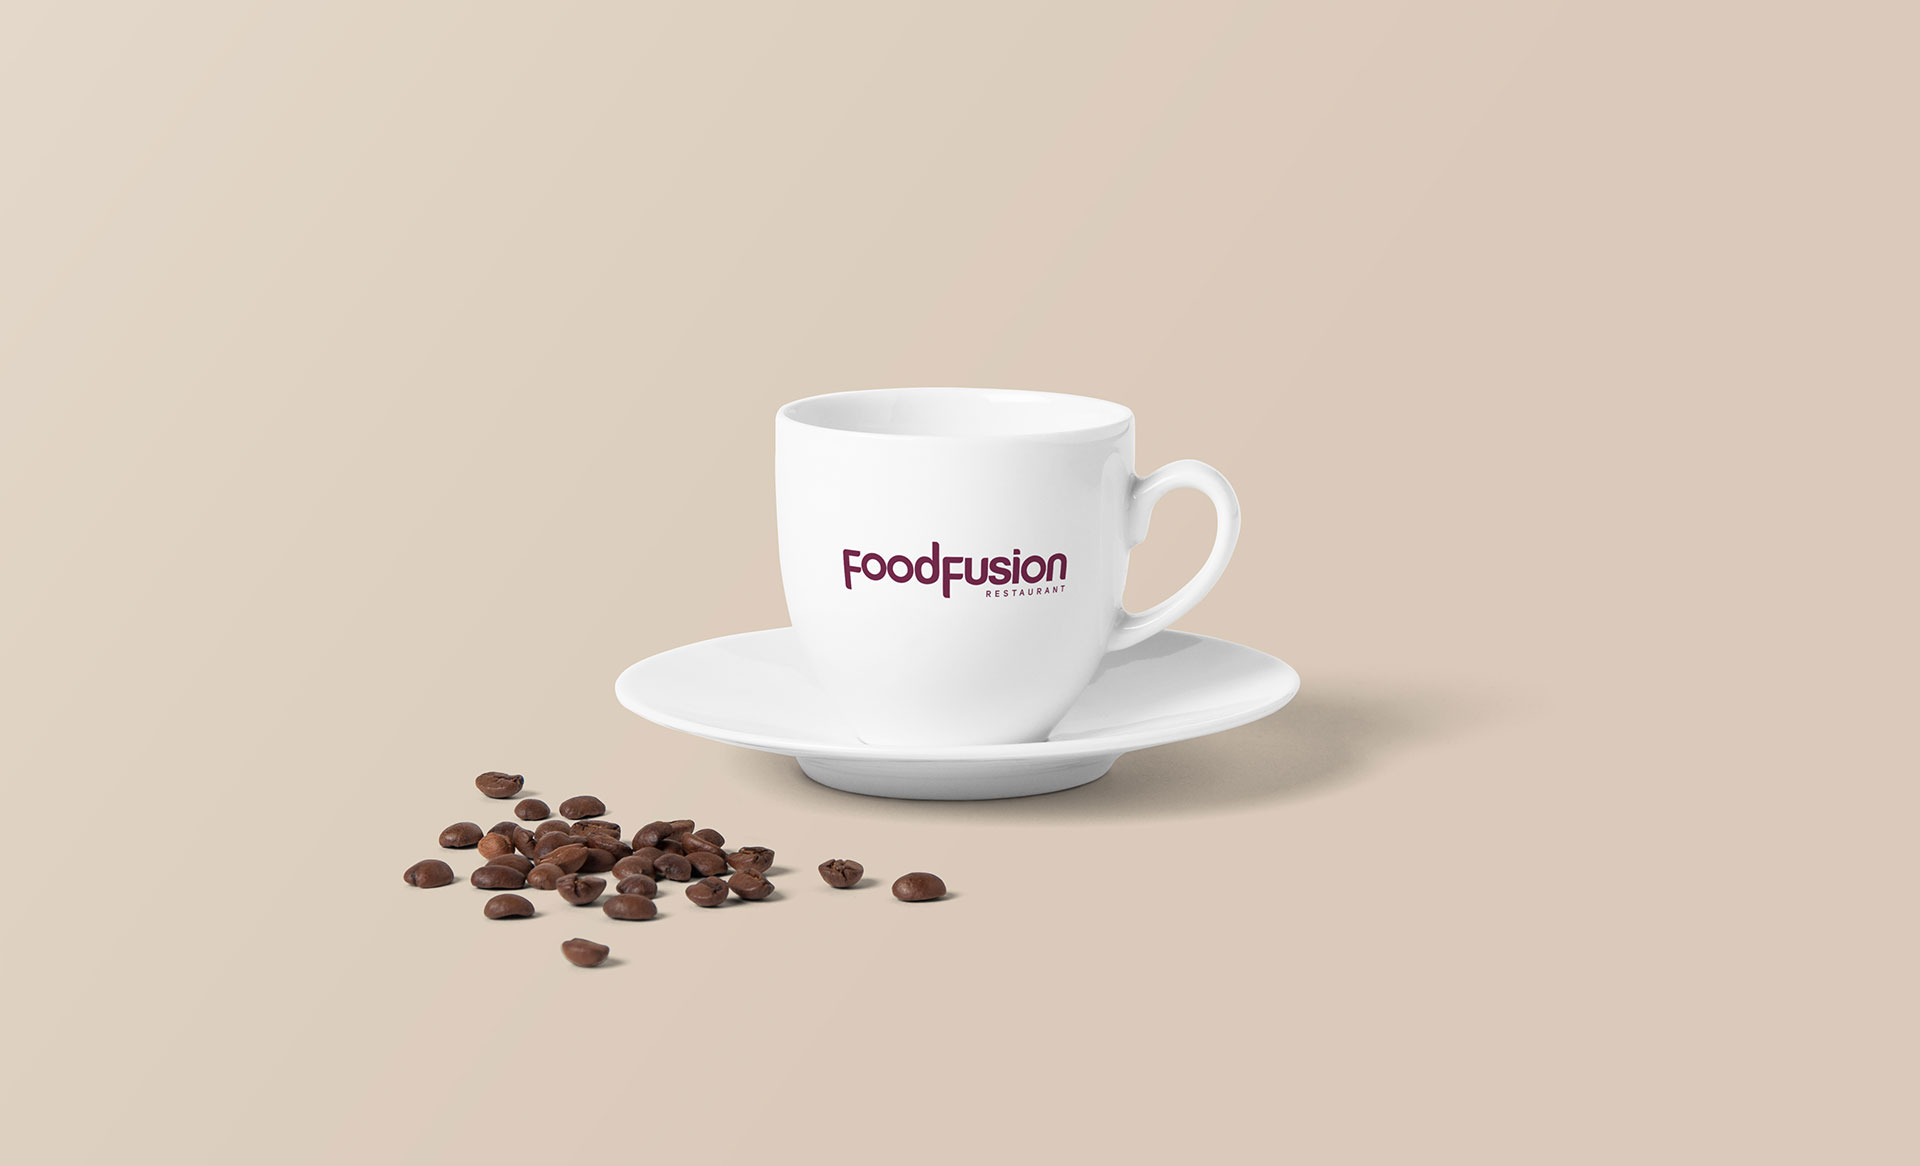 FoodFusion Restaurant Logo on cofee cup